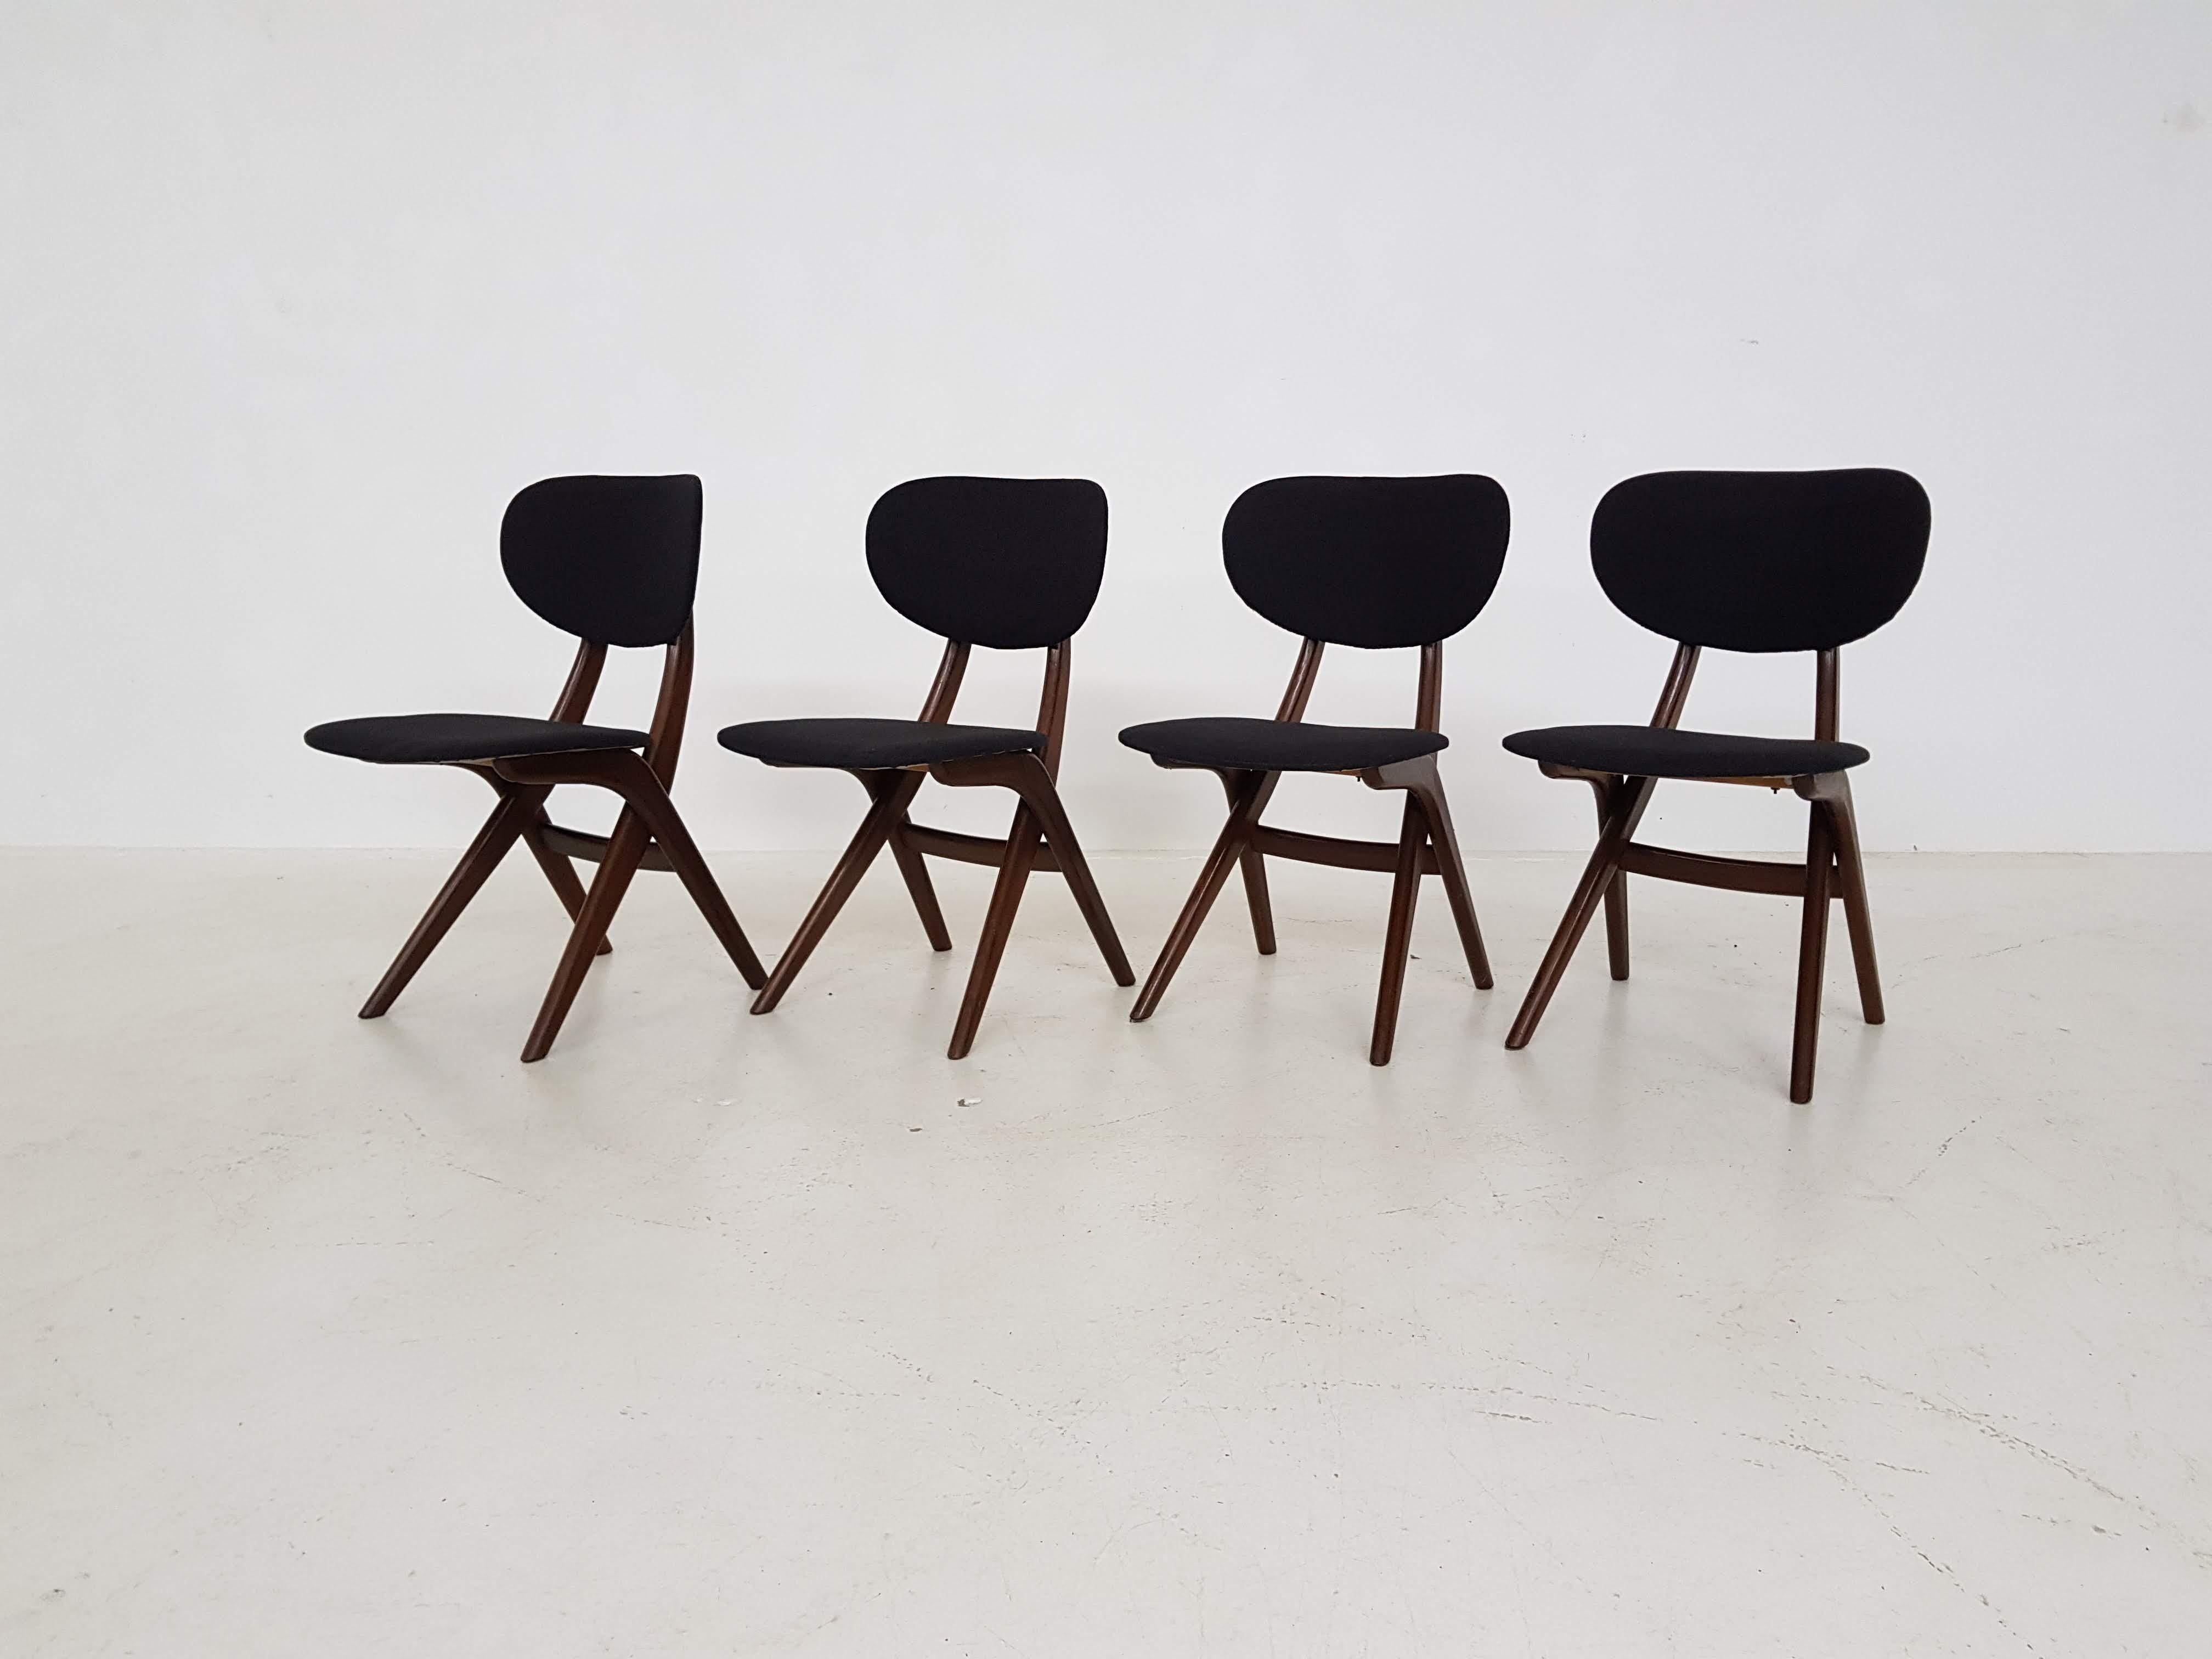 Dining chairs by Louis van Teeffelen for Wébé, Dutch design, 1950s

Teak dining chairs with black wool upholstery.

These chairs are made by Wébé the Netherlands. Wébé was a Dutch furniture producer with Louis van Teeffelen as their most famous